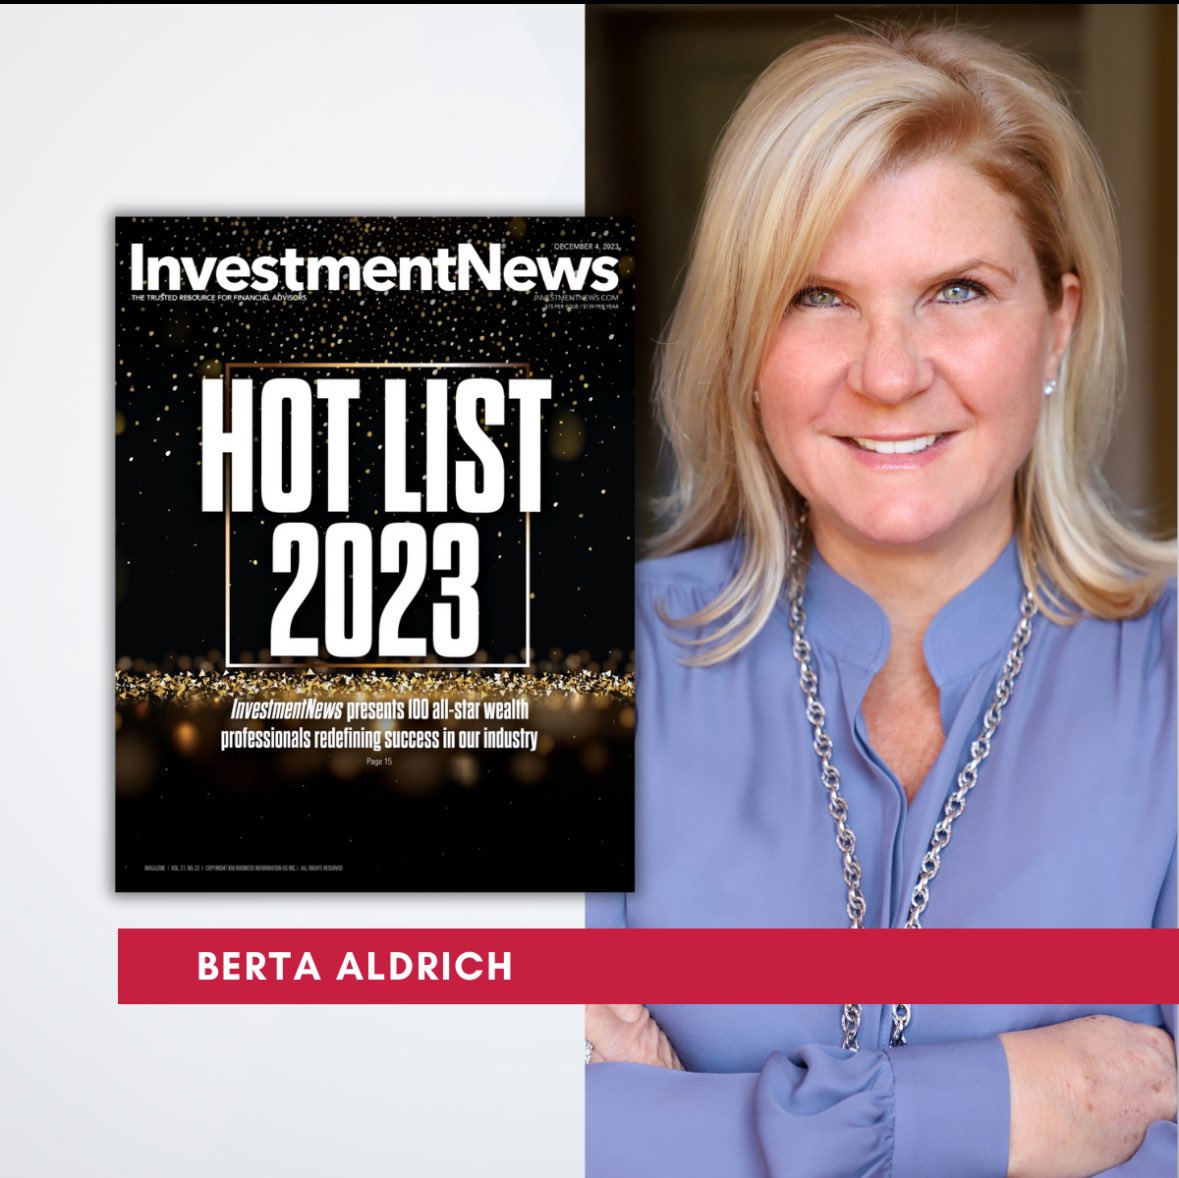 “The Hot List celebrates a collection of 100 individuals redefining success in the industry and setting new benchmarks.”
Thank you @investmentnews for this incredible honor. #investmentnews #womenexecutives #hr